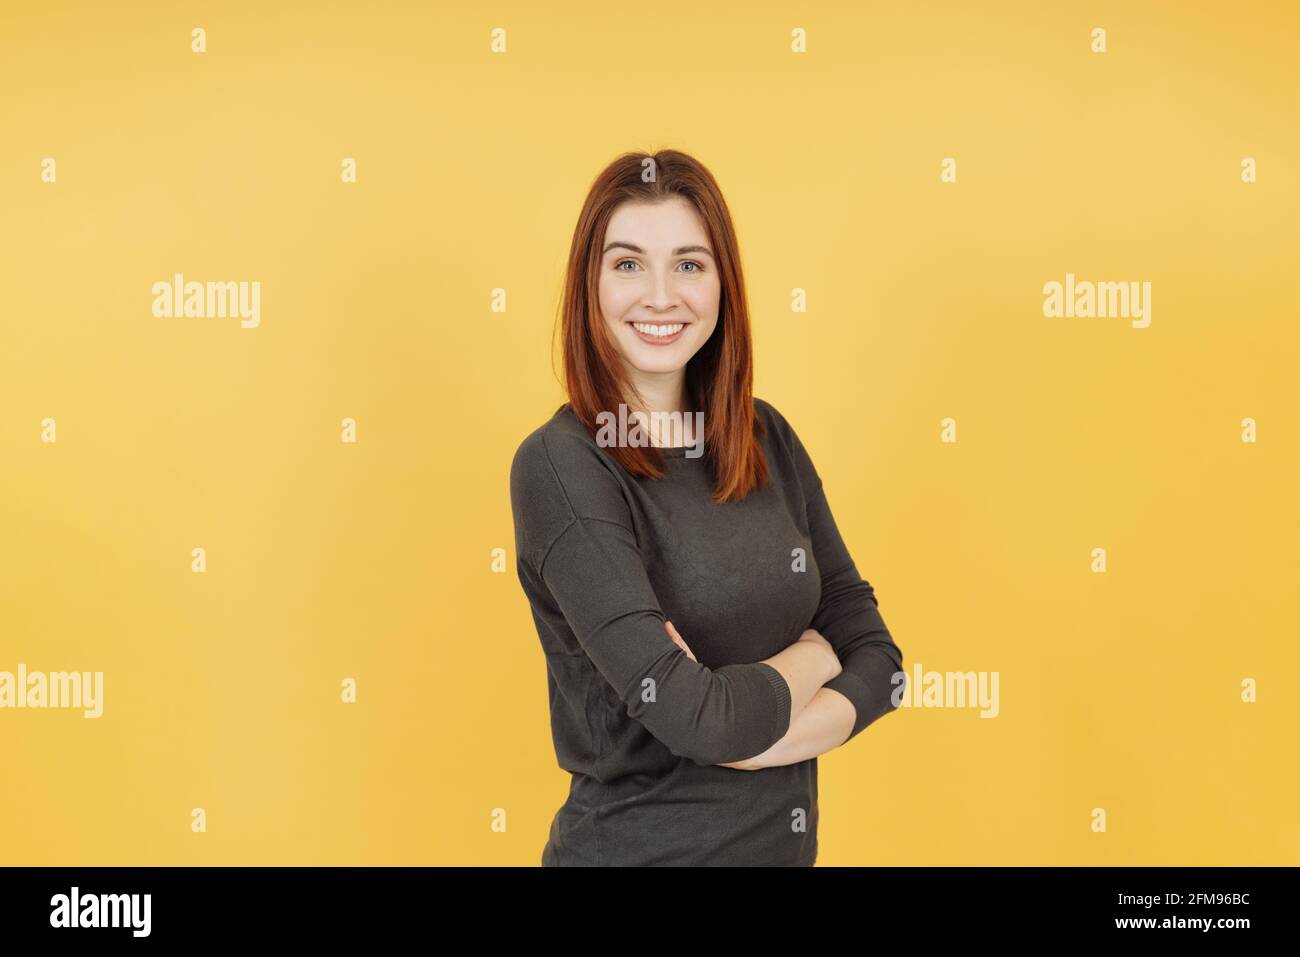 Attentive young woman looking at the camera with a warm friendly as she poses with folded arms over a yellow studio background with copyspace Stock Photo